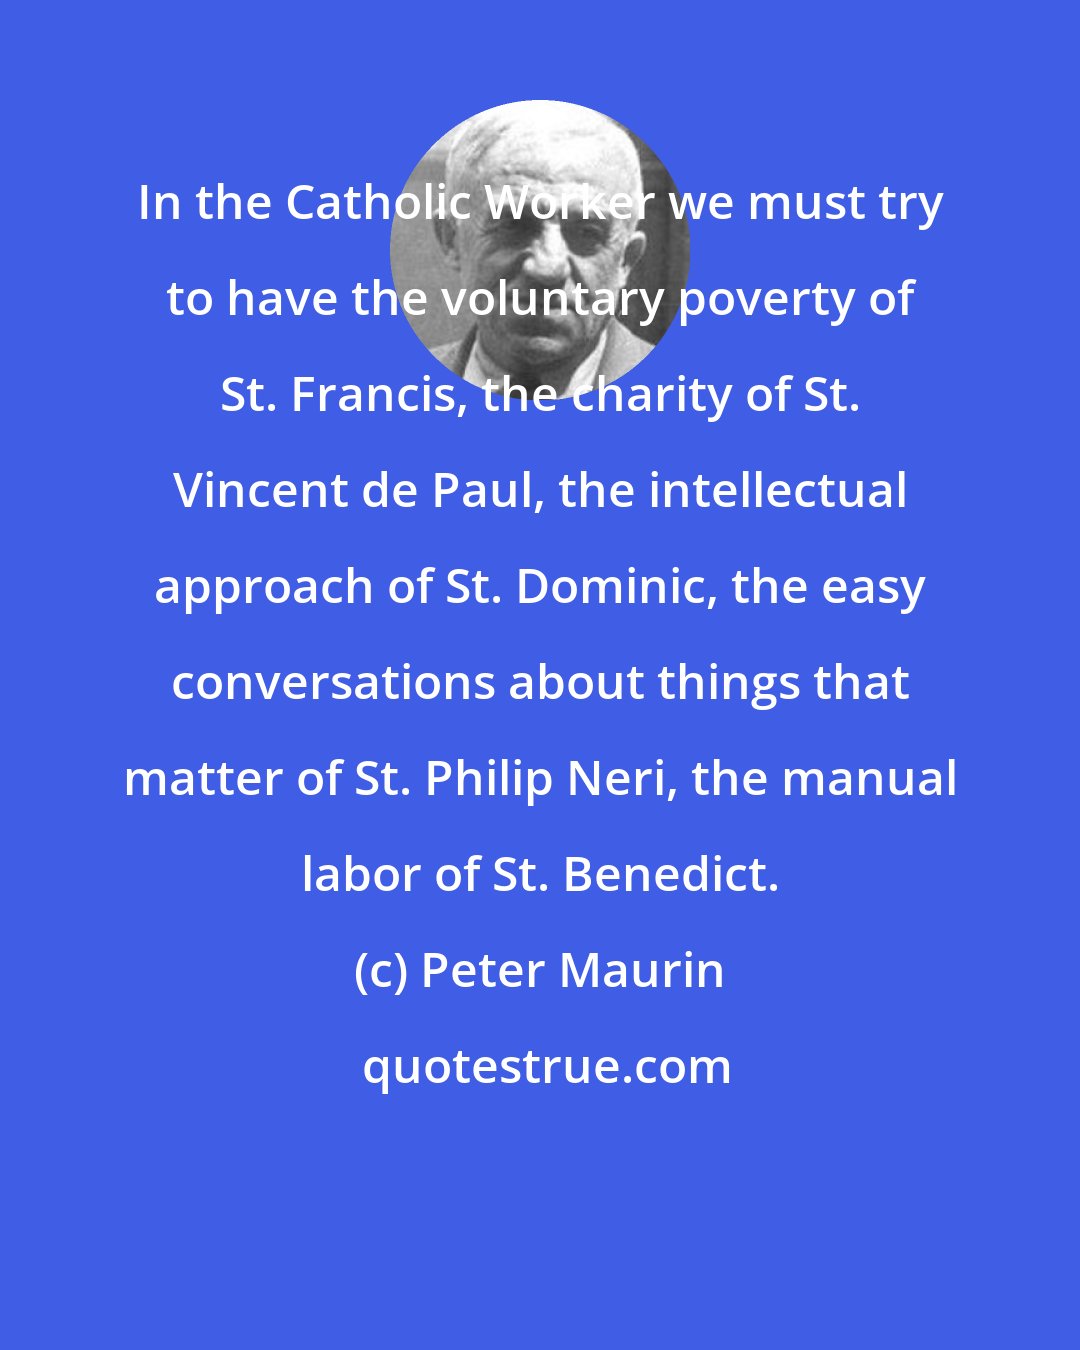 Peter Maurin: In the Catholic Worker we must try to have the voluntary poverty of St. Francis, the charity of St. Vincent de Paul, the intellectual approach of St. Dominic, the easy conversations about things that matter of St. Philip Neri, the manual labor of St. Benedict.